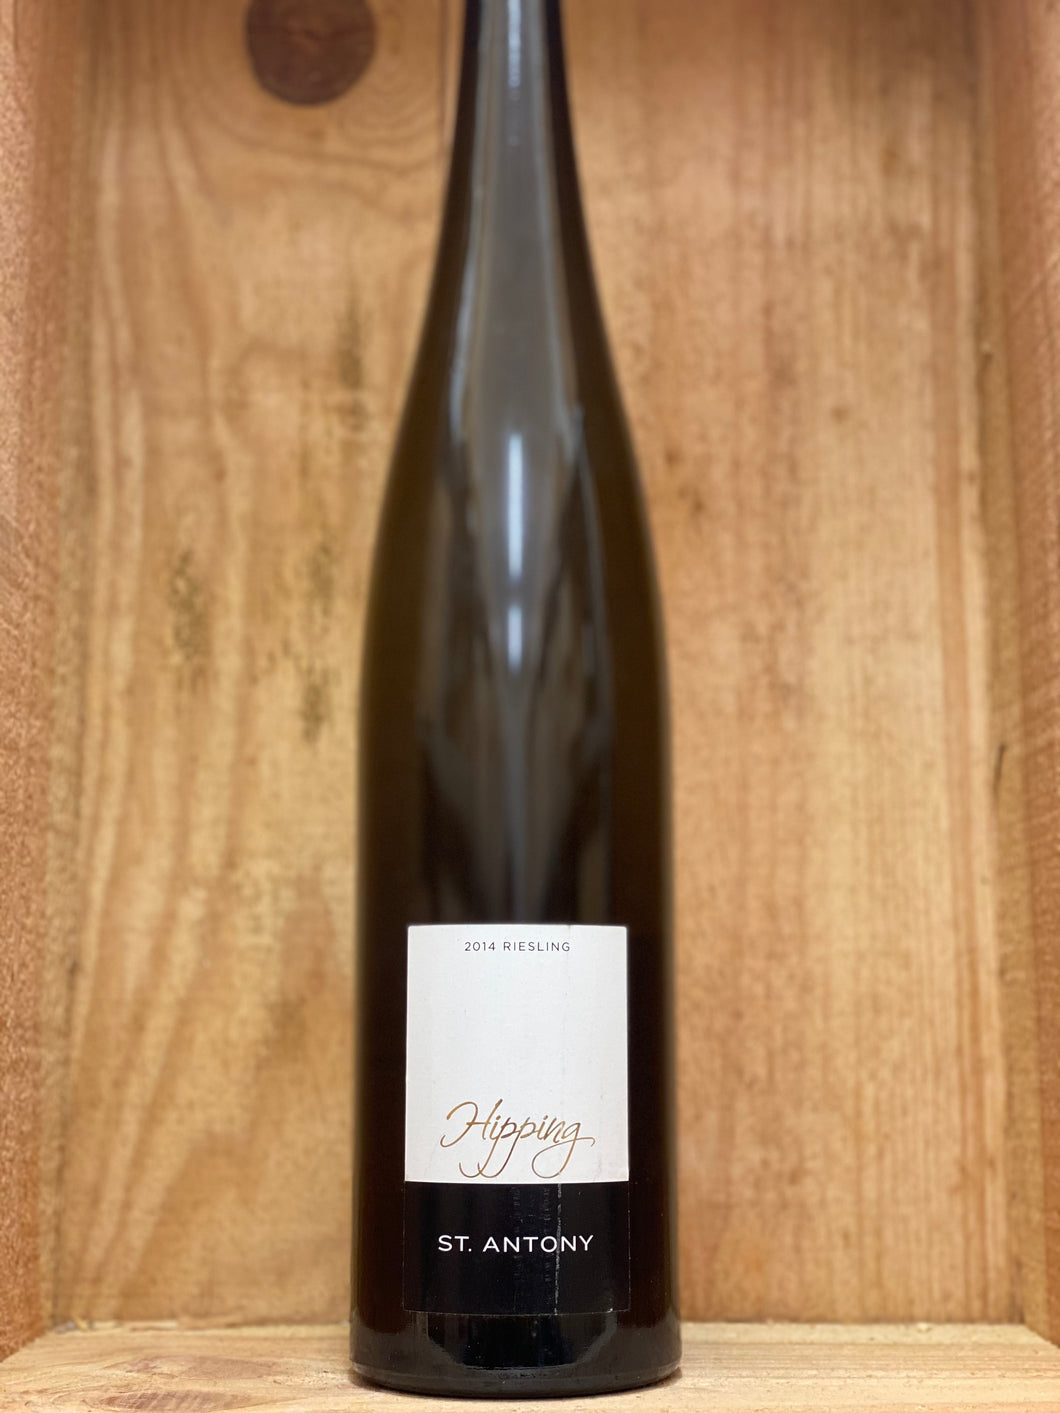 St. Anthony 2014 Hipping GG Riesling 1,5l